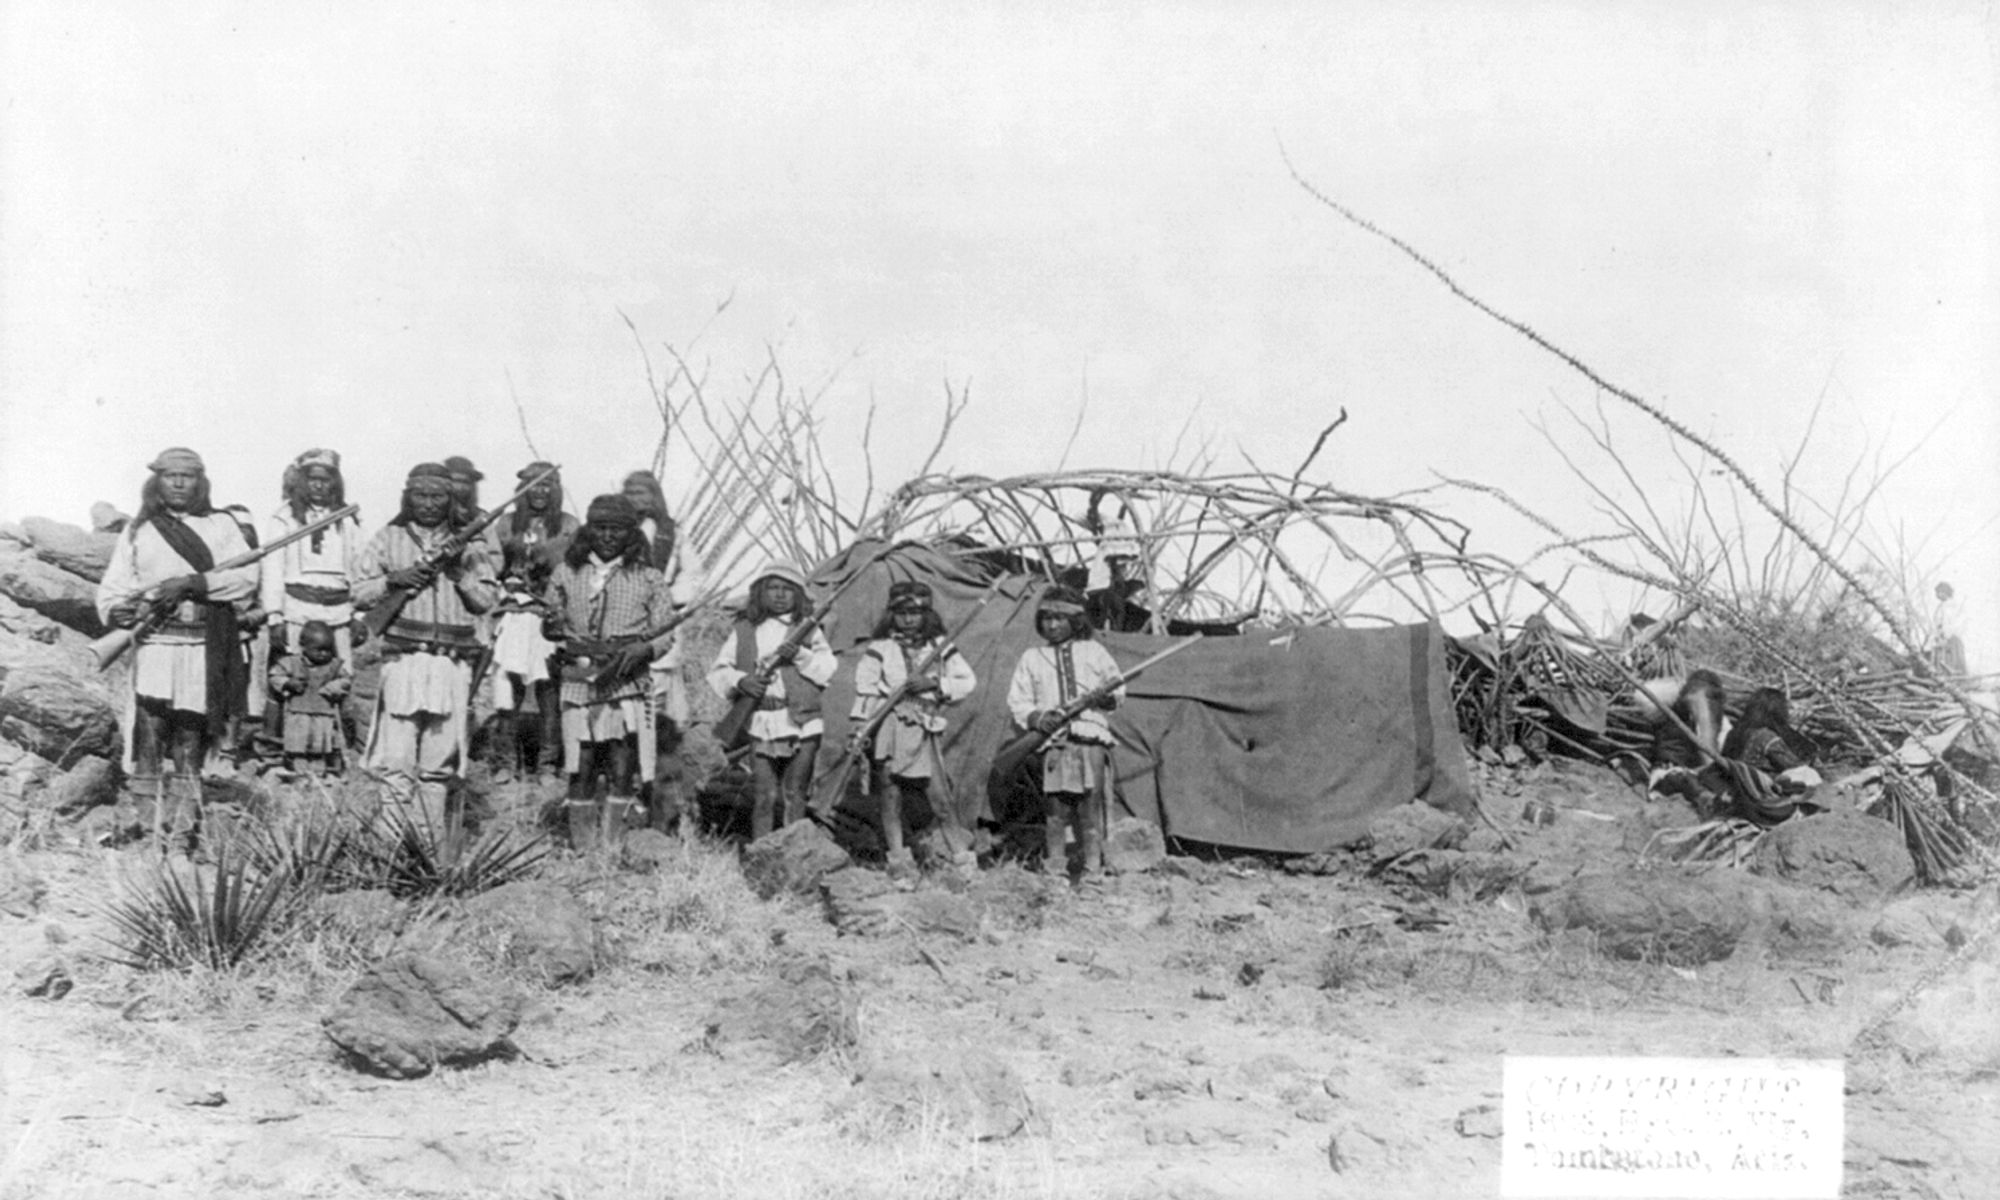 C.S. Fly's photo of the well-armed Chiricahuan men captioned, "Scene in Geronimo's camp before surrender to General Crook, March 27, 1886: Group in Natches' camp; boys with rifles."